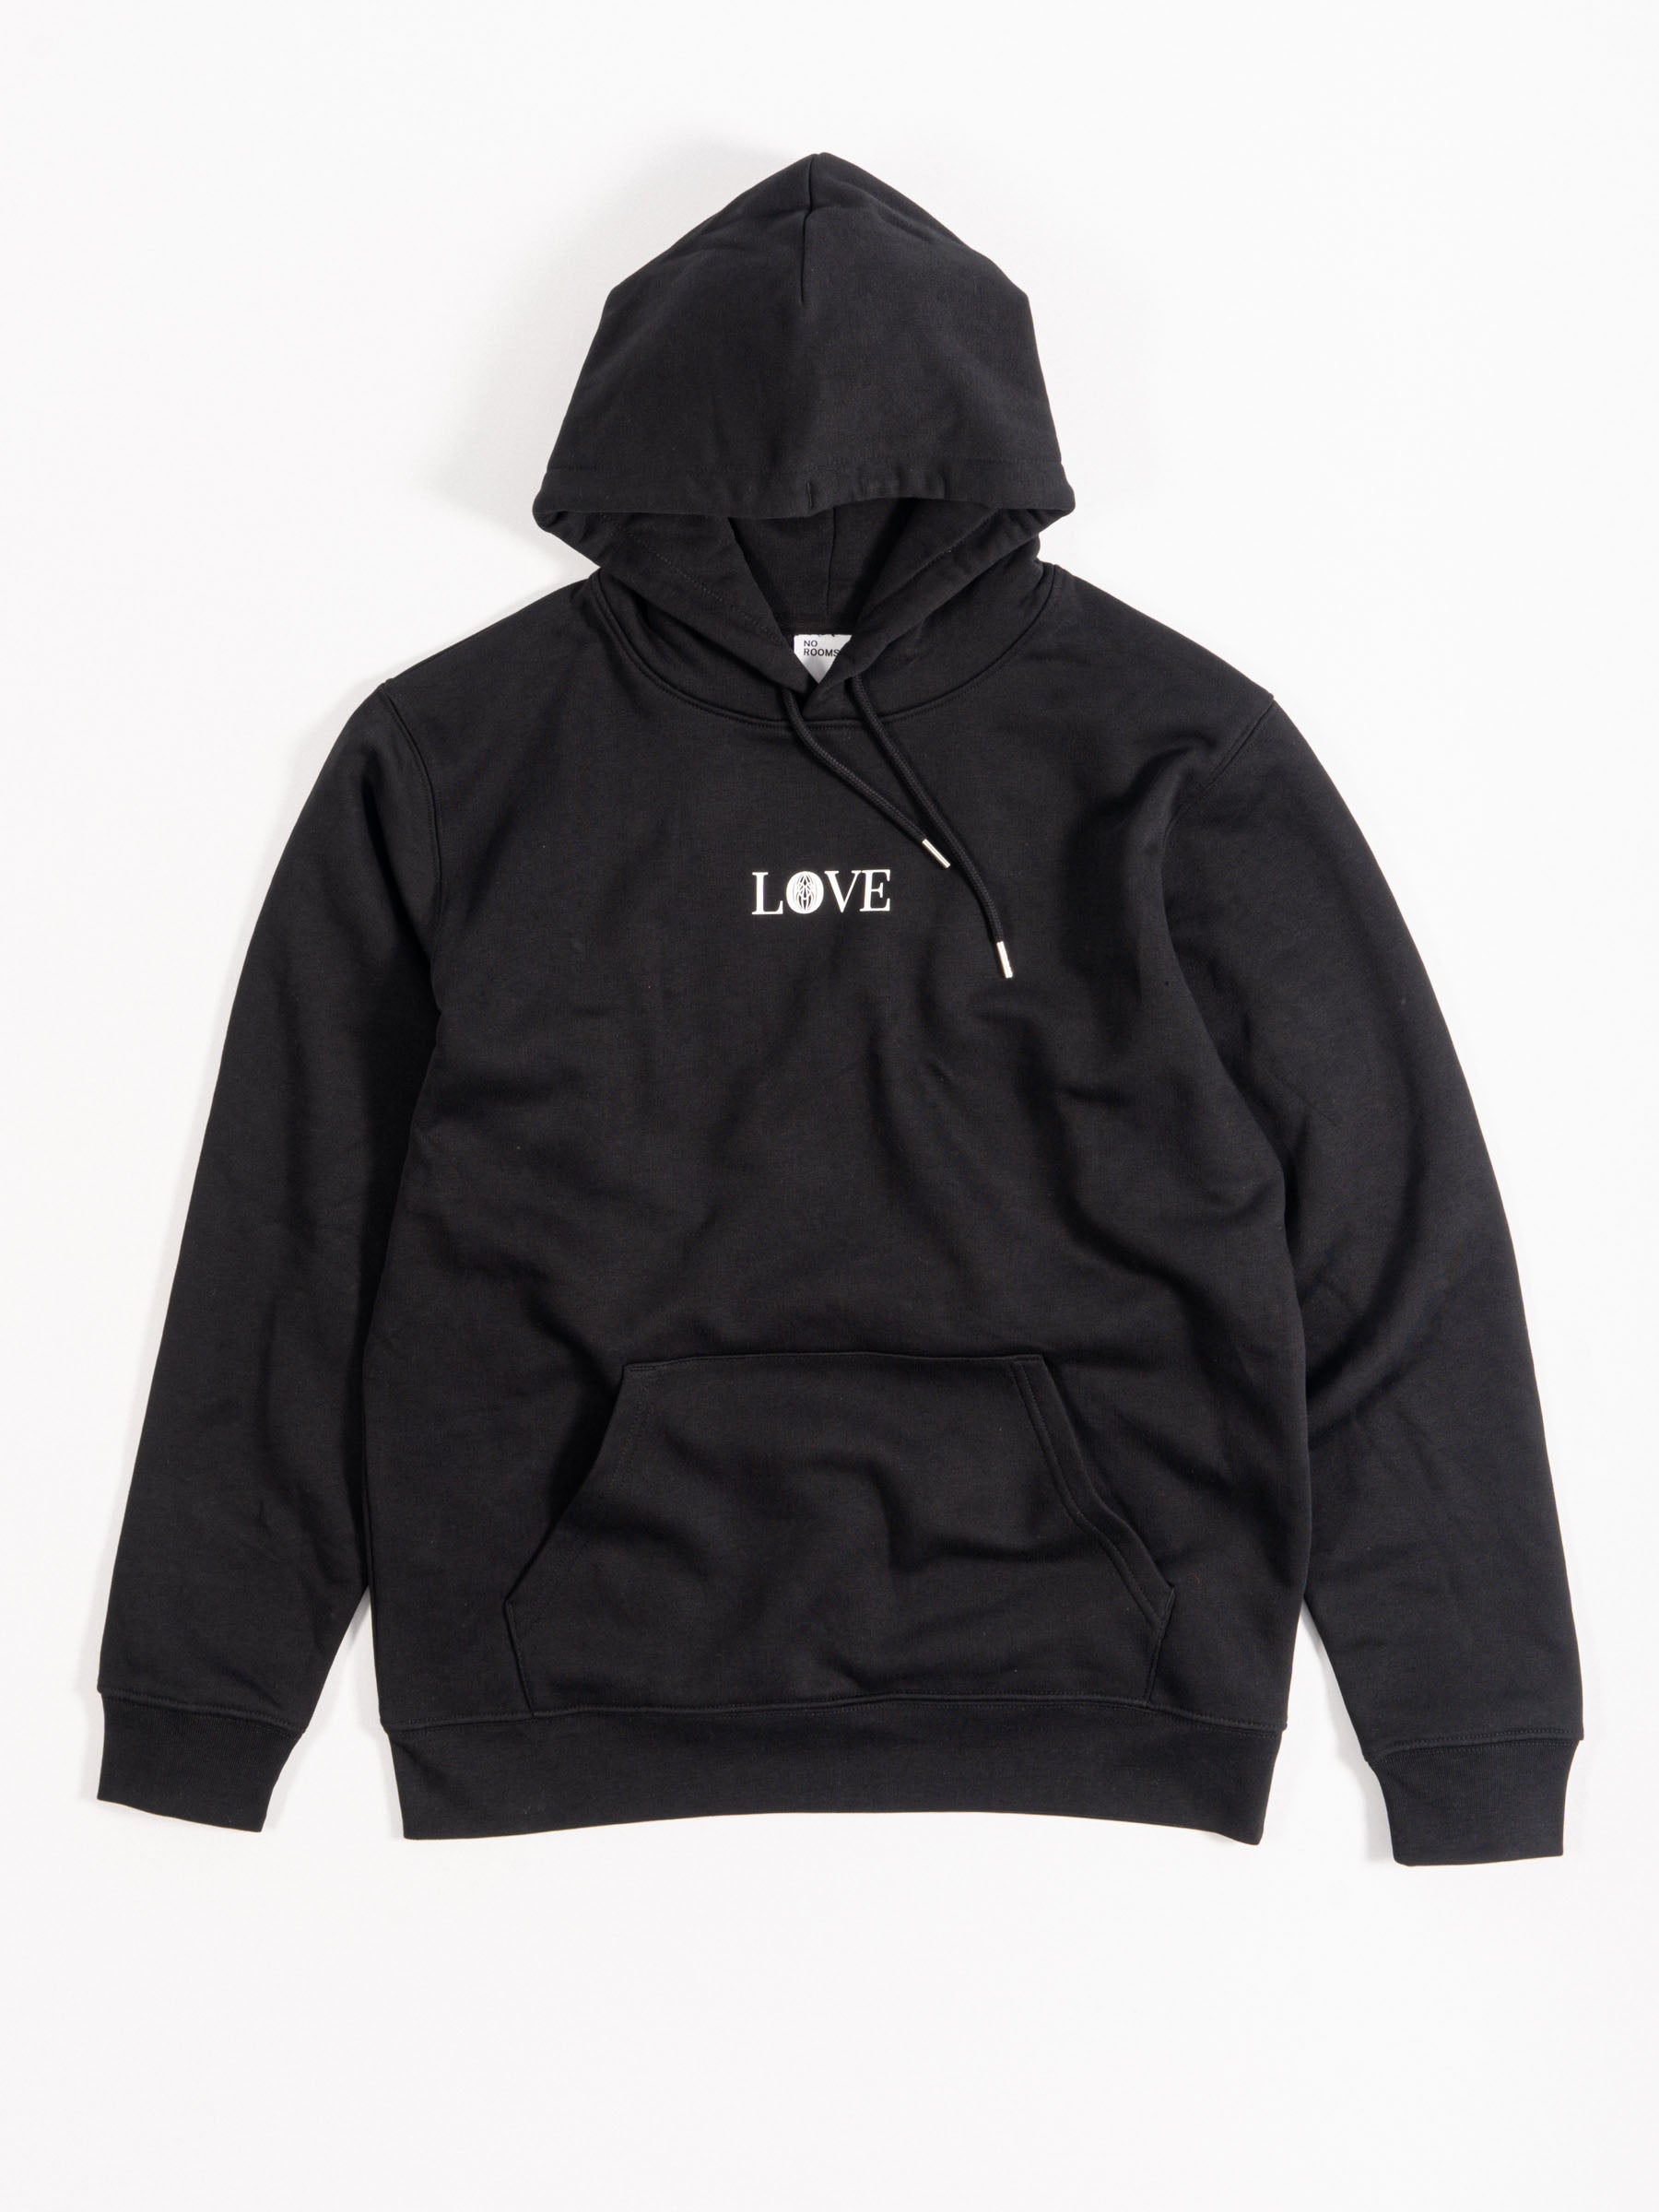 Classic Love Hooded Sweater Black